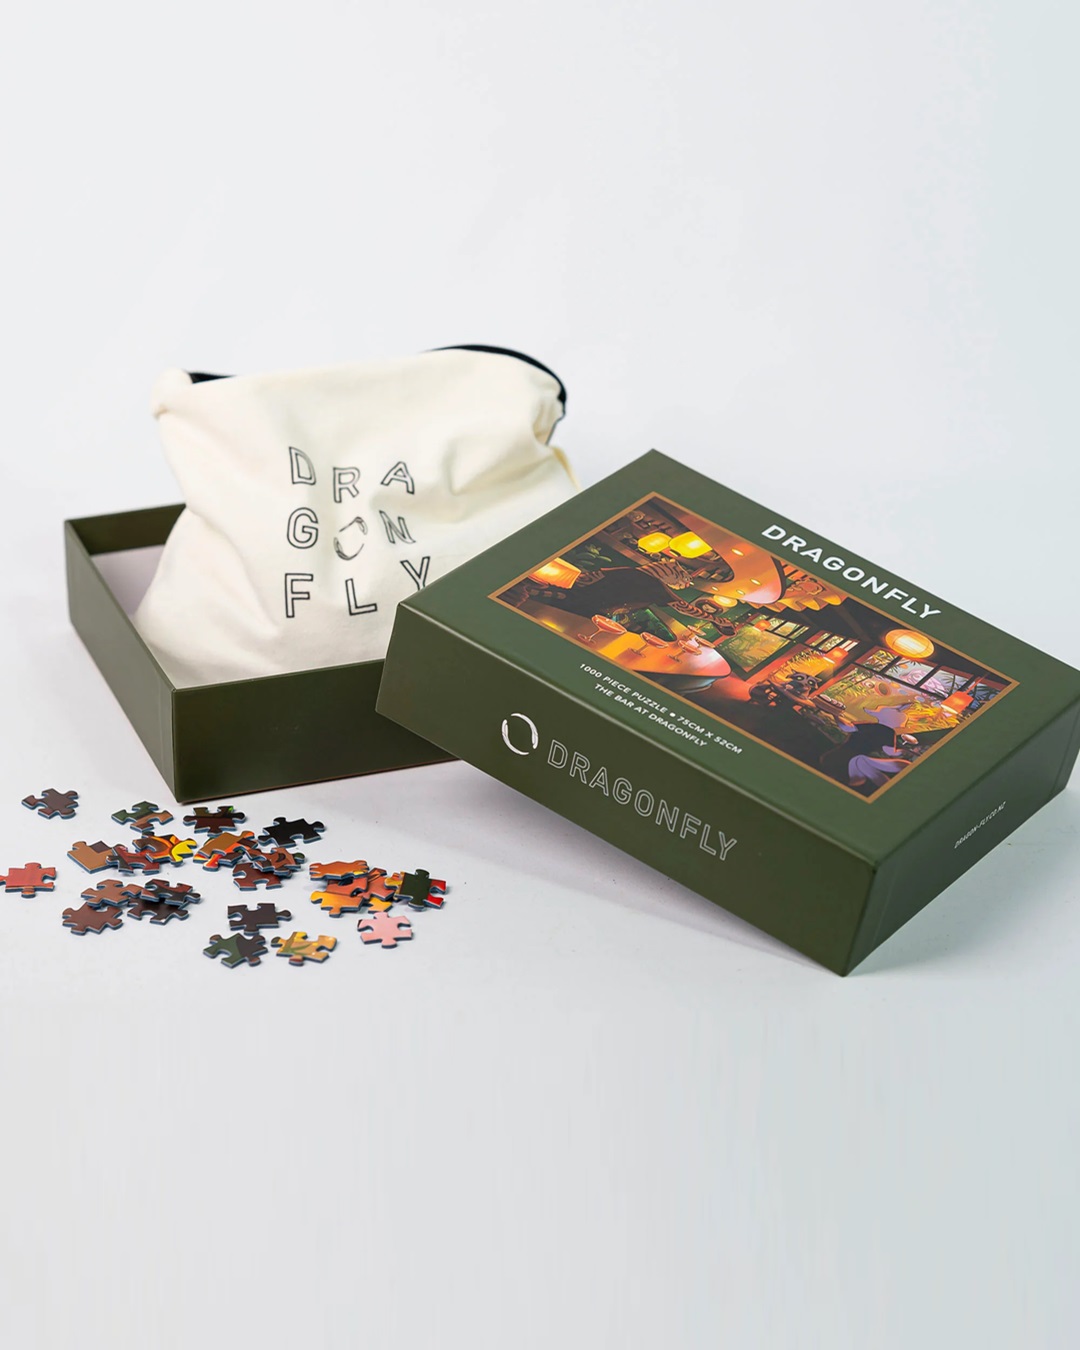 Dragonfly puzzle in box with bag and puzzle pieces